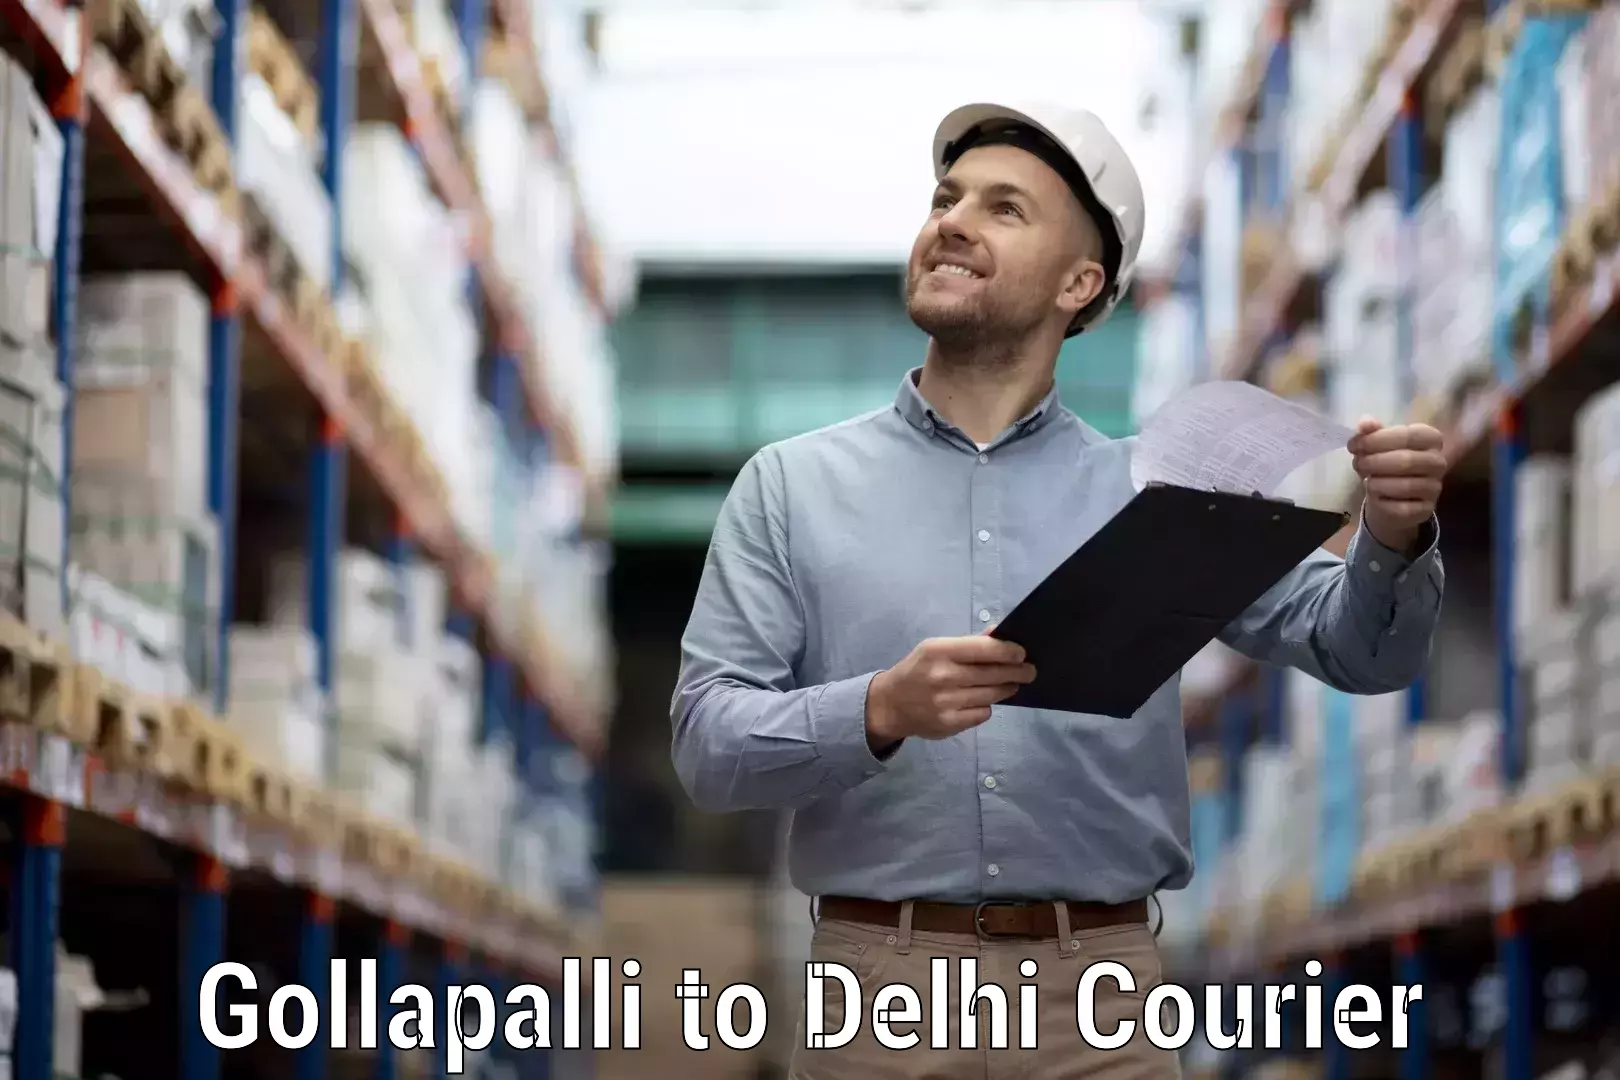 On-call courier service Gollapalli to East Delhi